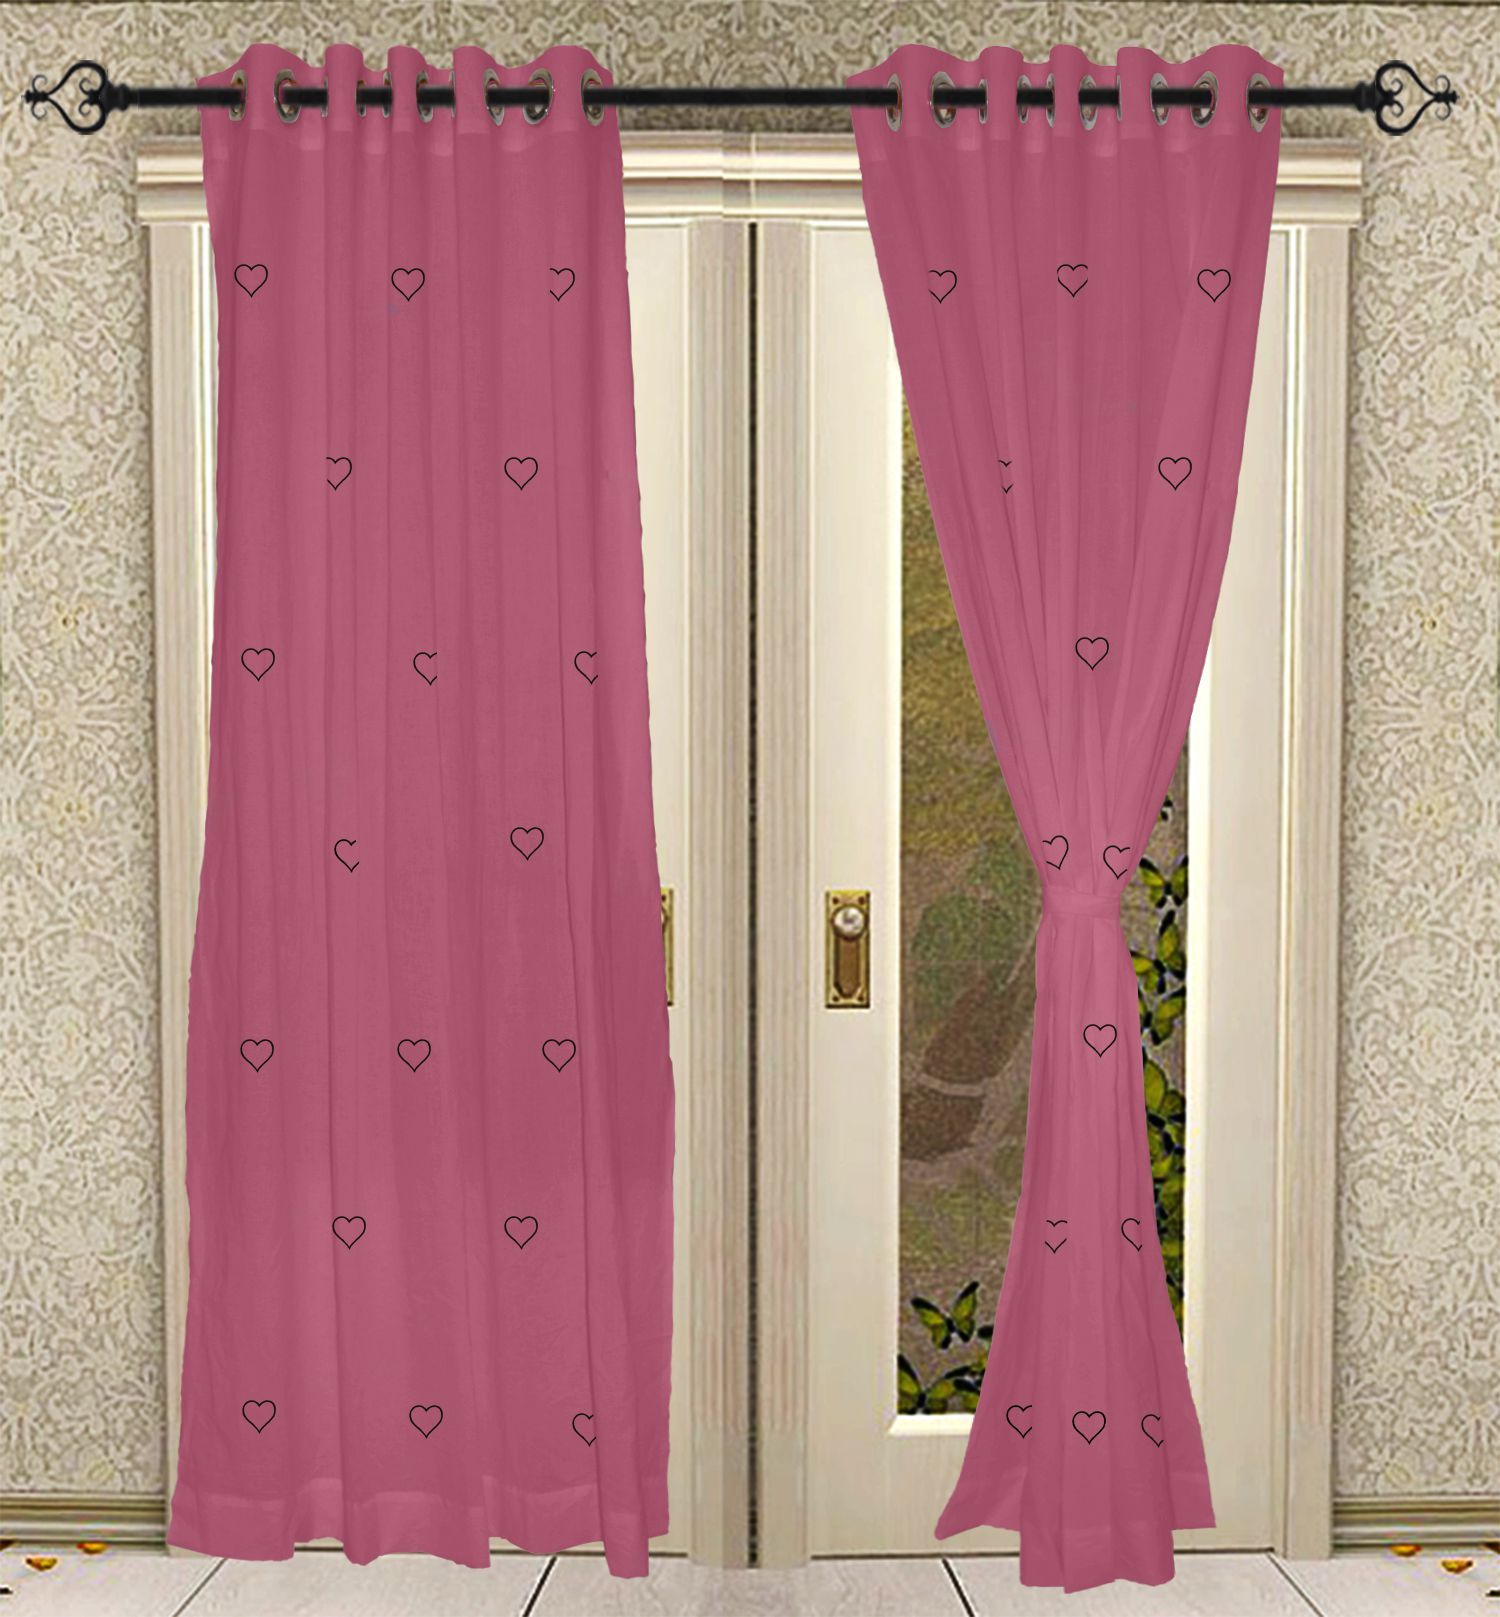 Eyelet Hand Block Printed Ganesha Cotton Pink Curtain Panels For Door 42 X  84 Inch Inside Solid Cotton Curtain Panels (View 15 of 30)